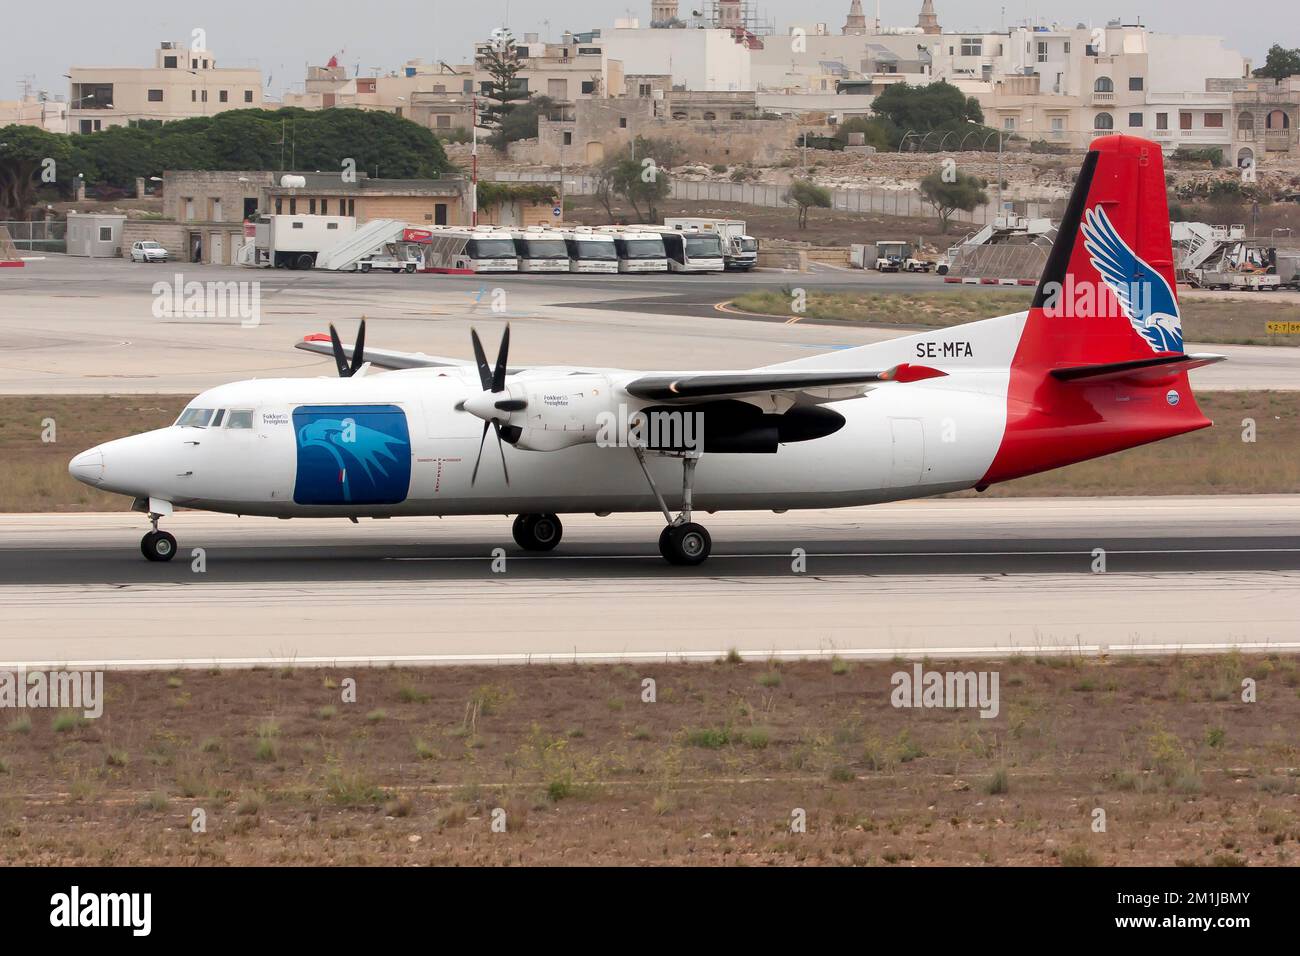 Malta. 25th Sep, 2014. An Amapola Flyg Fokker 50 freighter on the runway of Malta international airport.Amapola Flyg is a passenger and cargo airline based in Stockholm, Sweden. It operates freight services on behalf of the Swedish Post Office, Jetpak and MiniLiner from Maastricht Aachen Airport and its main base at Stockholm-Arlanda Airport. (Photo by Fabrizio Gandolfo/SOPA Images/Sipa USA) Credit: Sipa USA/Alamy Live News Stock Photo